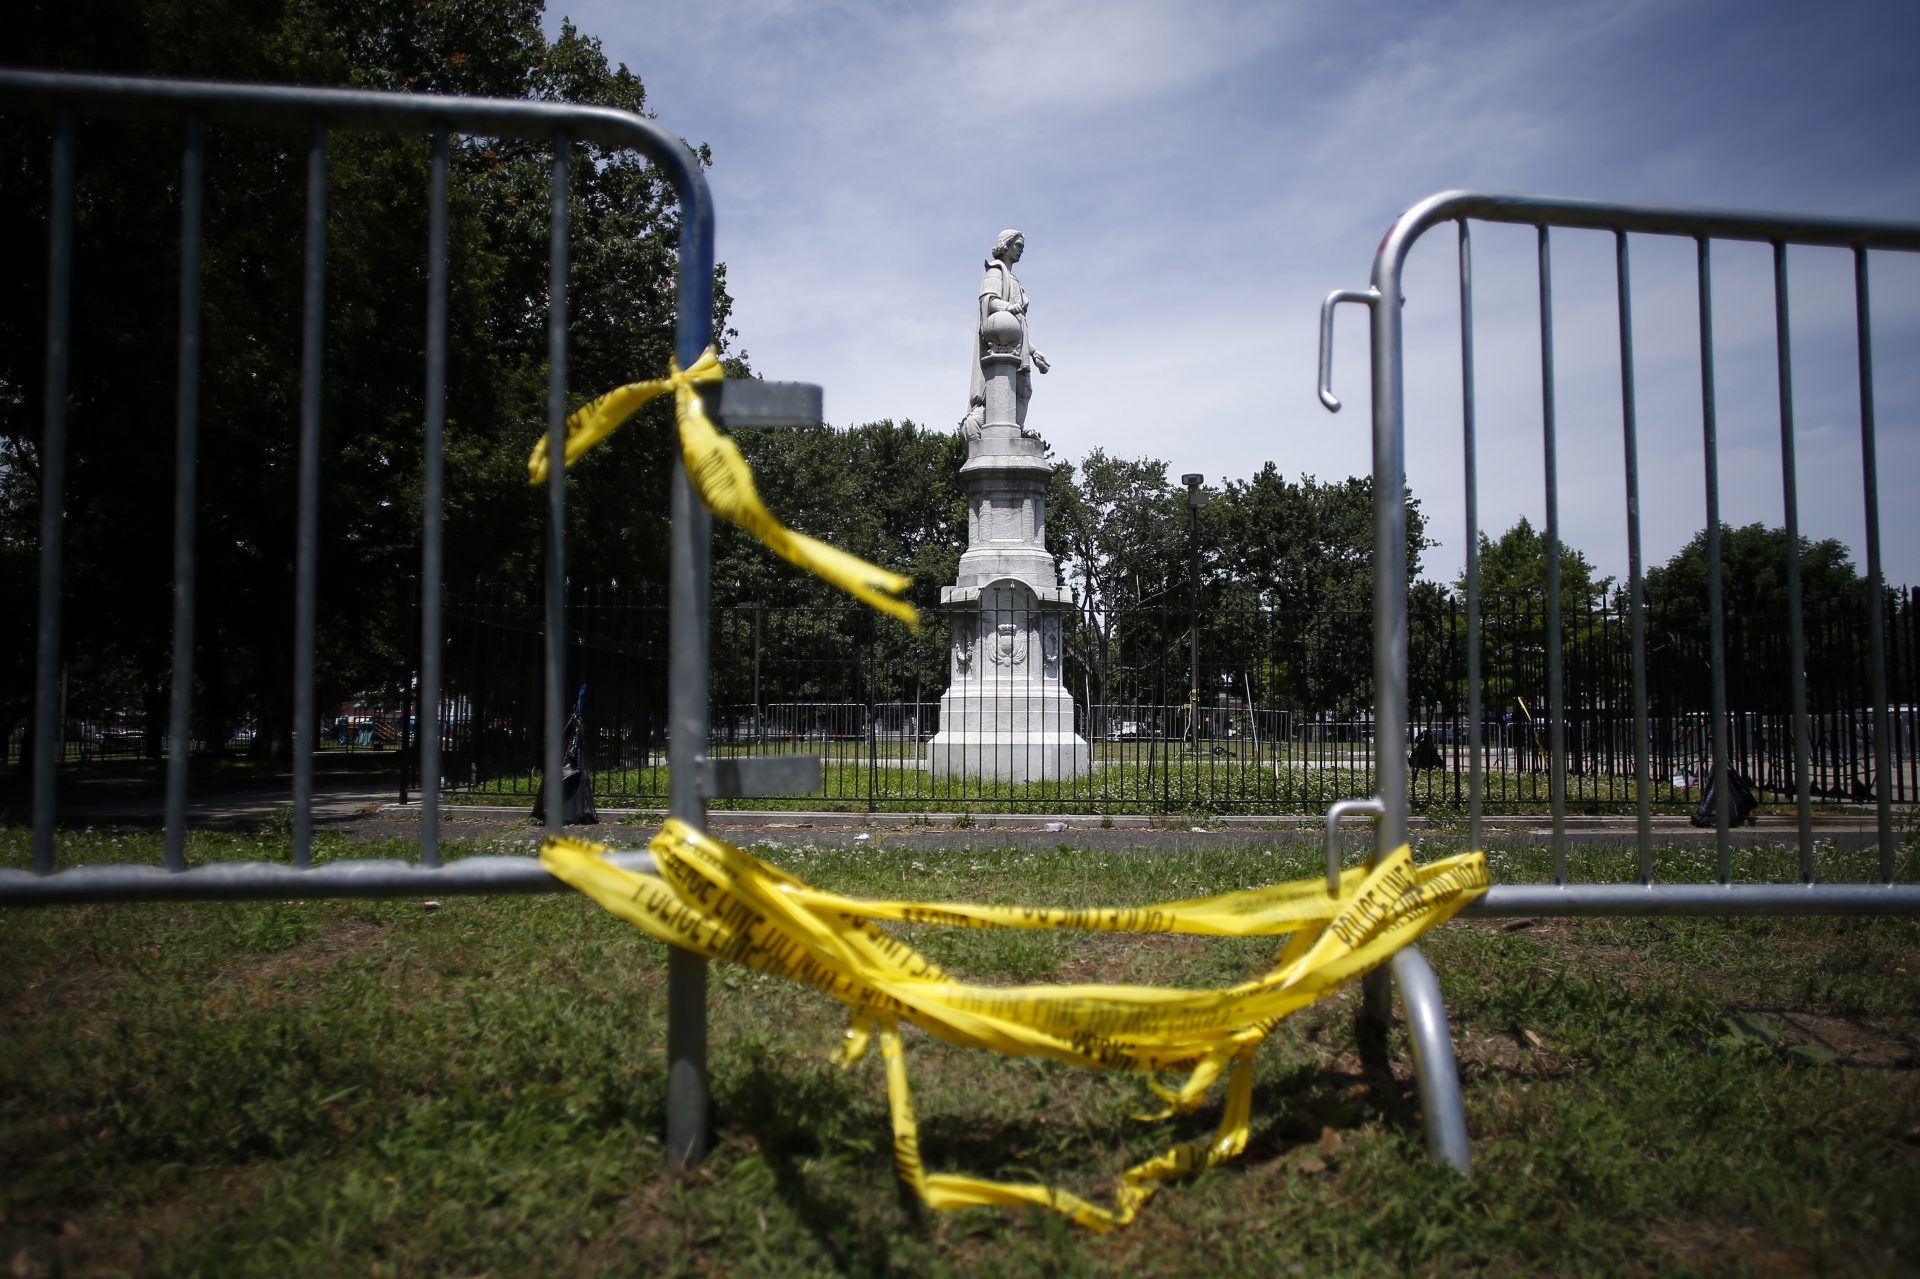 A statue of Christopher Columbus is seen behind barricades at Marconi Plaza, Monday, June 15, 2020, in the South Philadelphia neighborhood of Philadelphia.